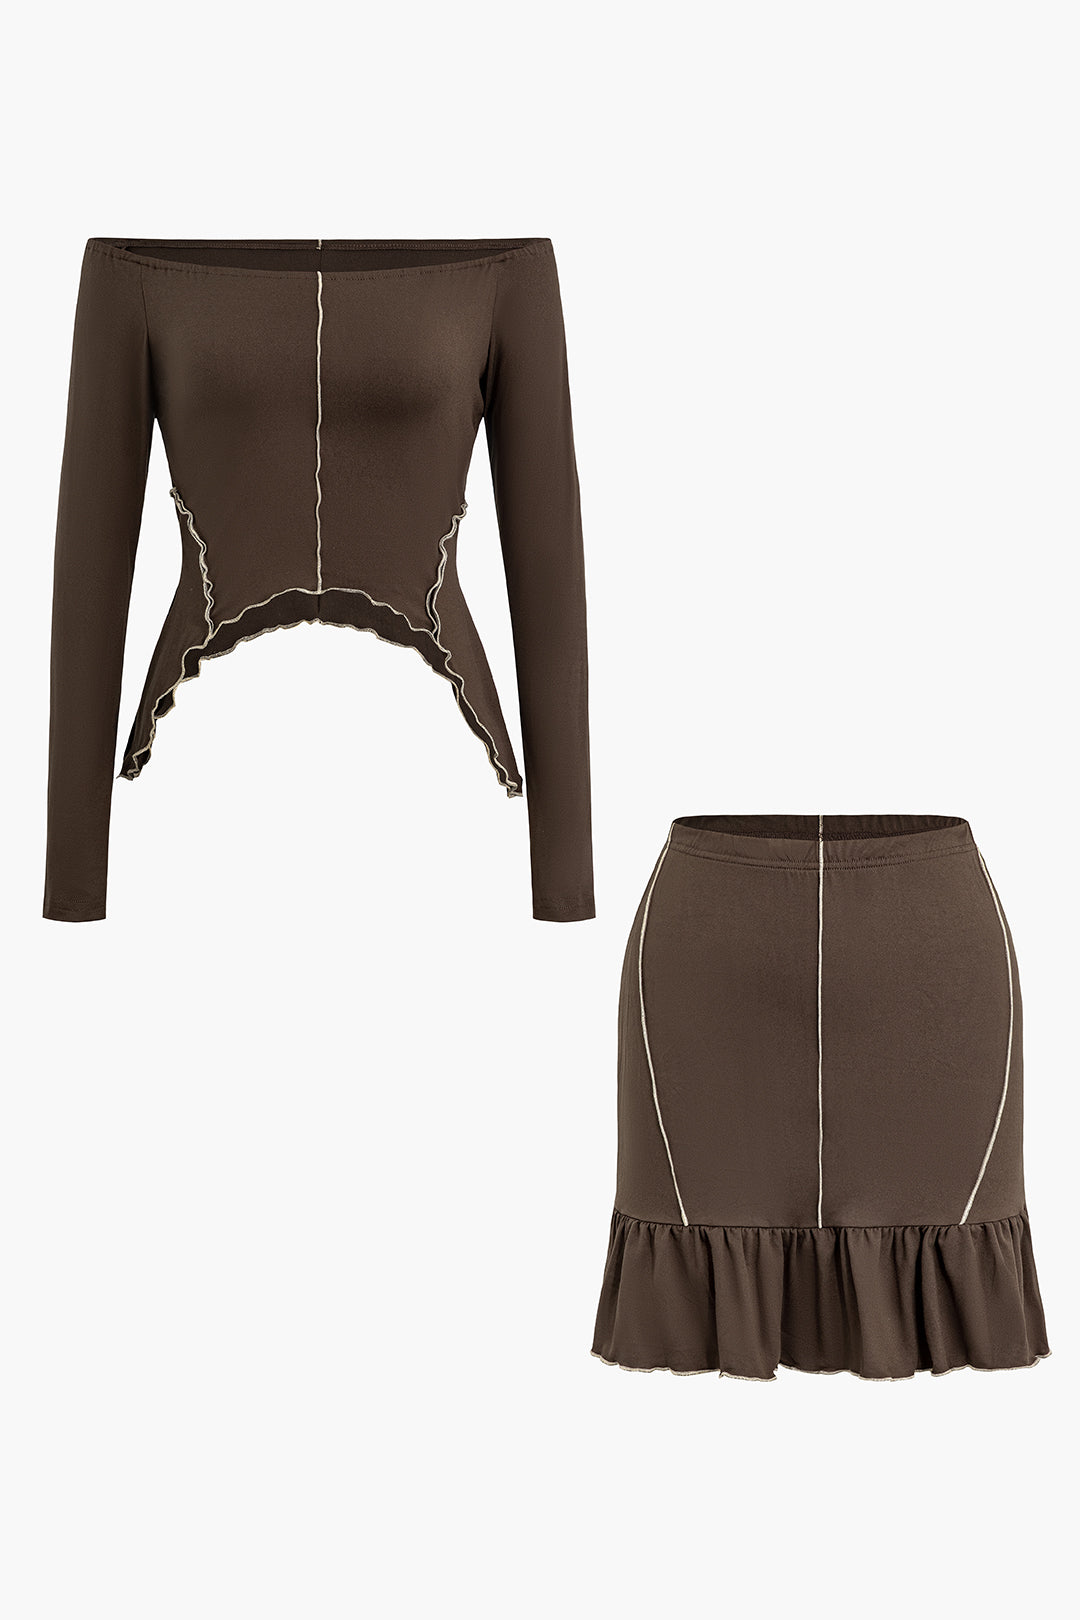 Contrast Stitching Off Shoulder Long Sleeve Top And Ruffle Mini Skirt Set